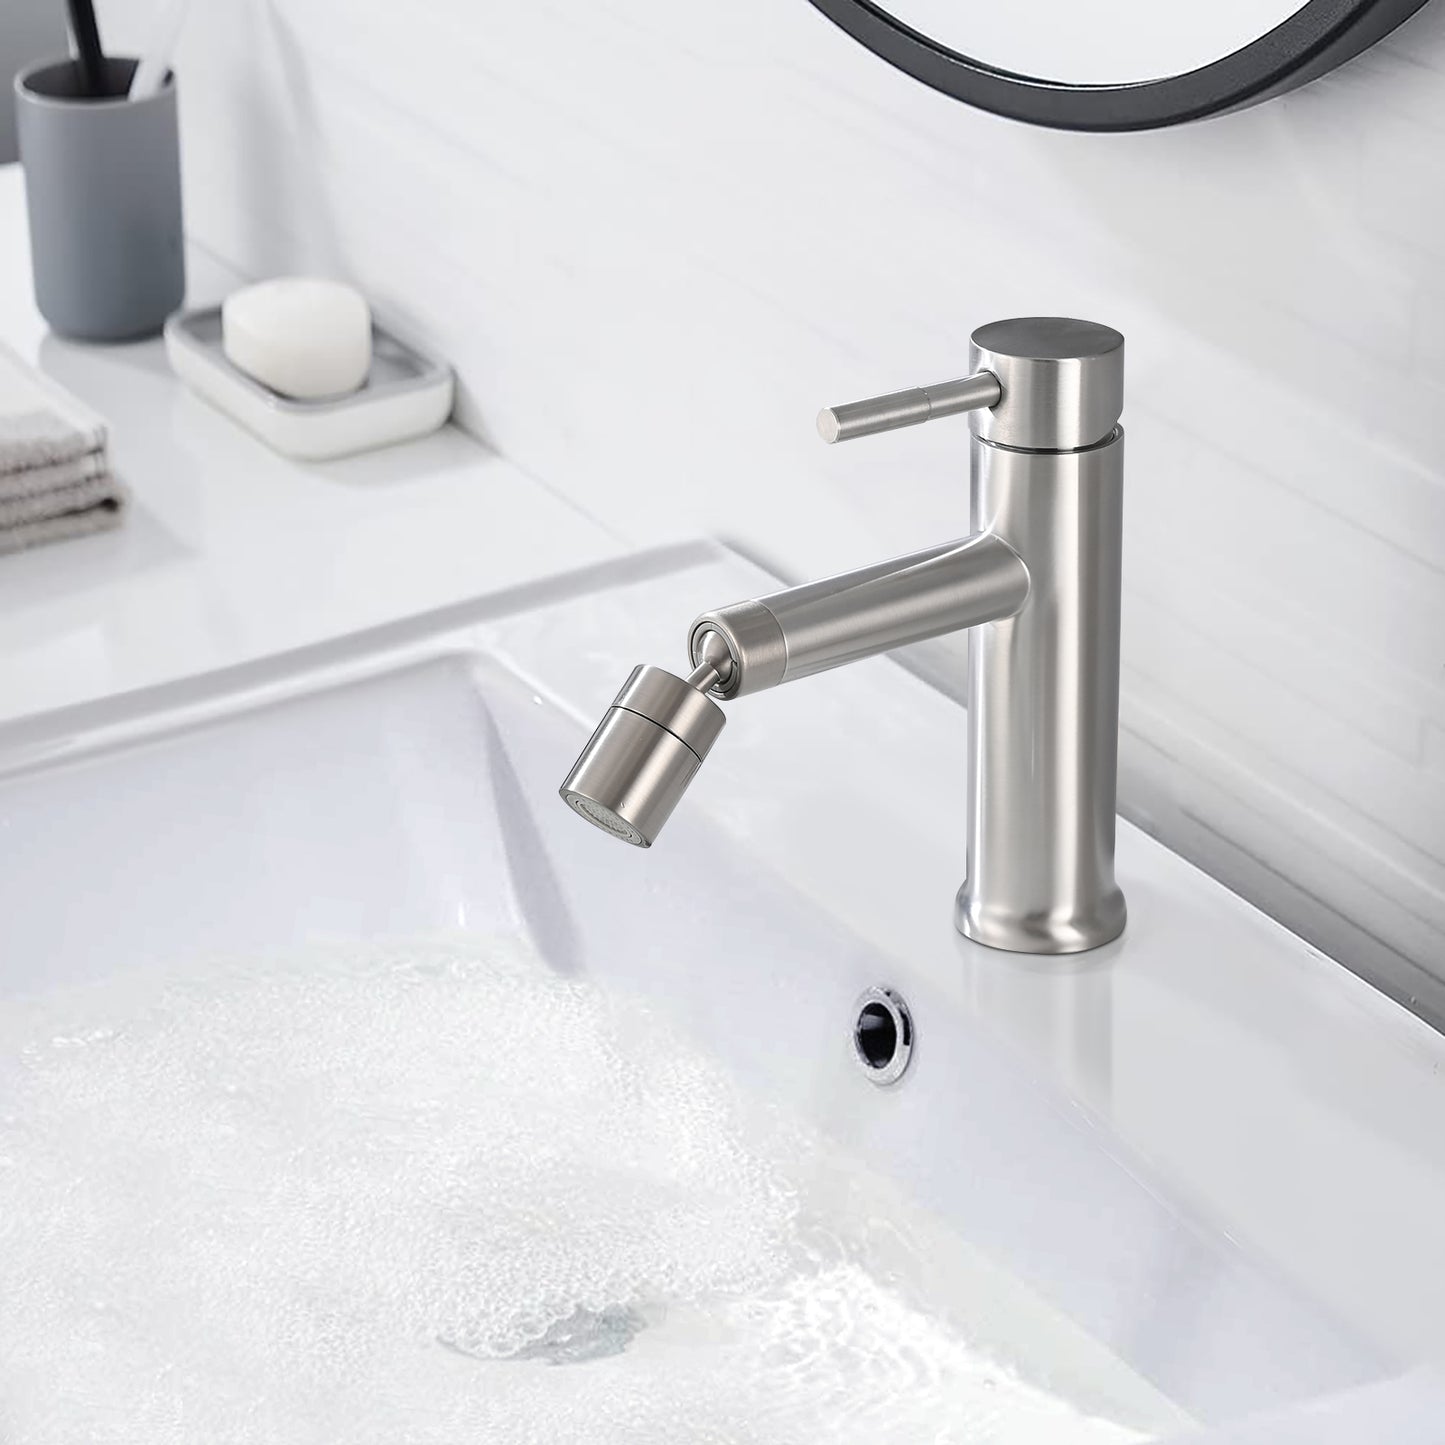 Brushed Nickle Bathroom Sink Faucet  2 Mode with 360° Rotating Aerator